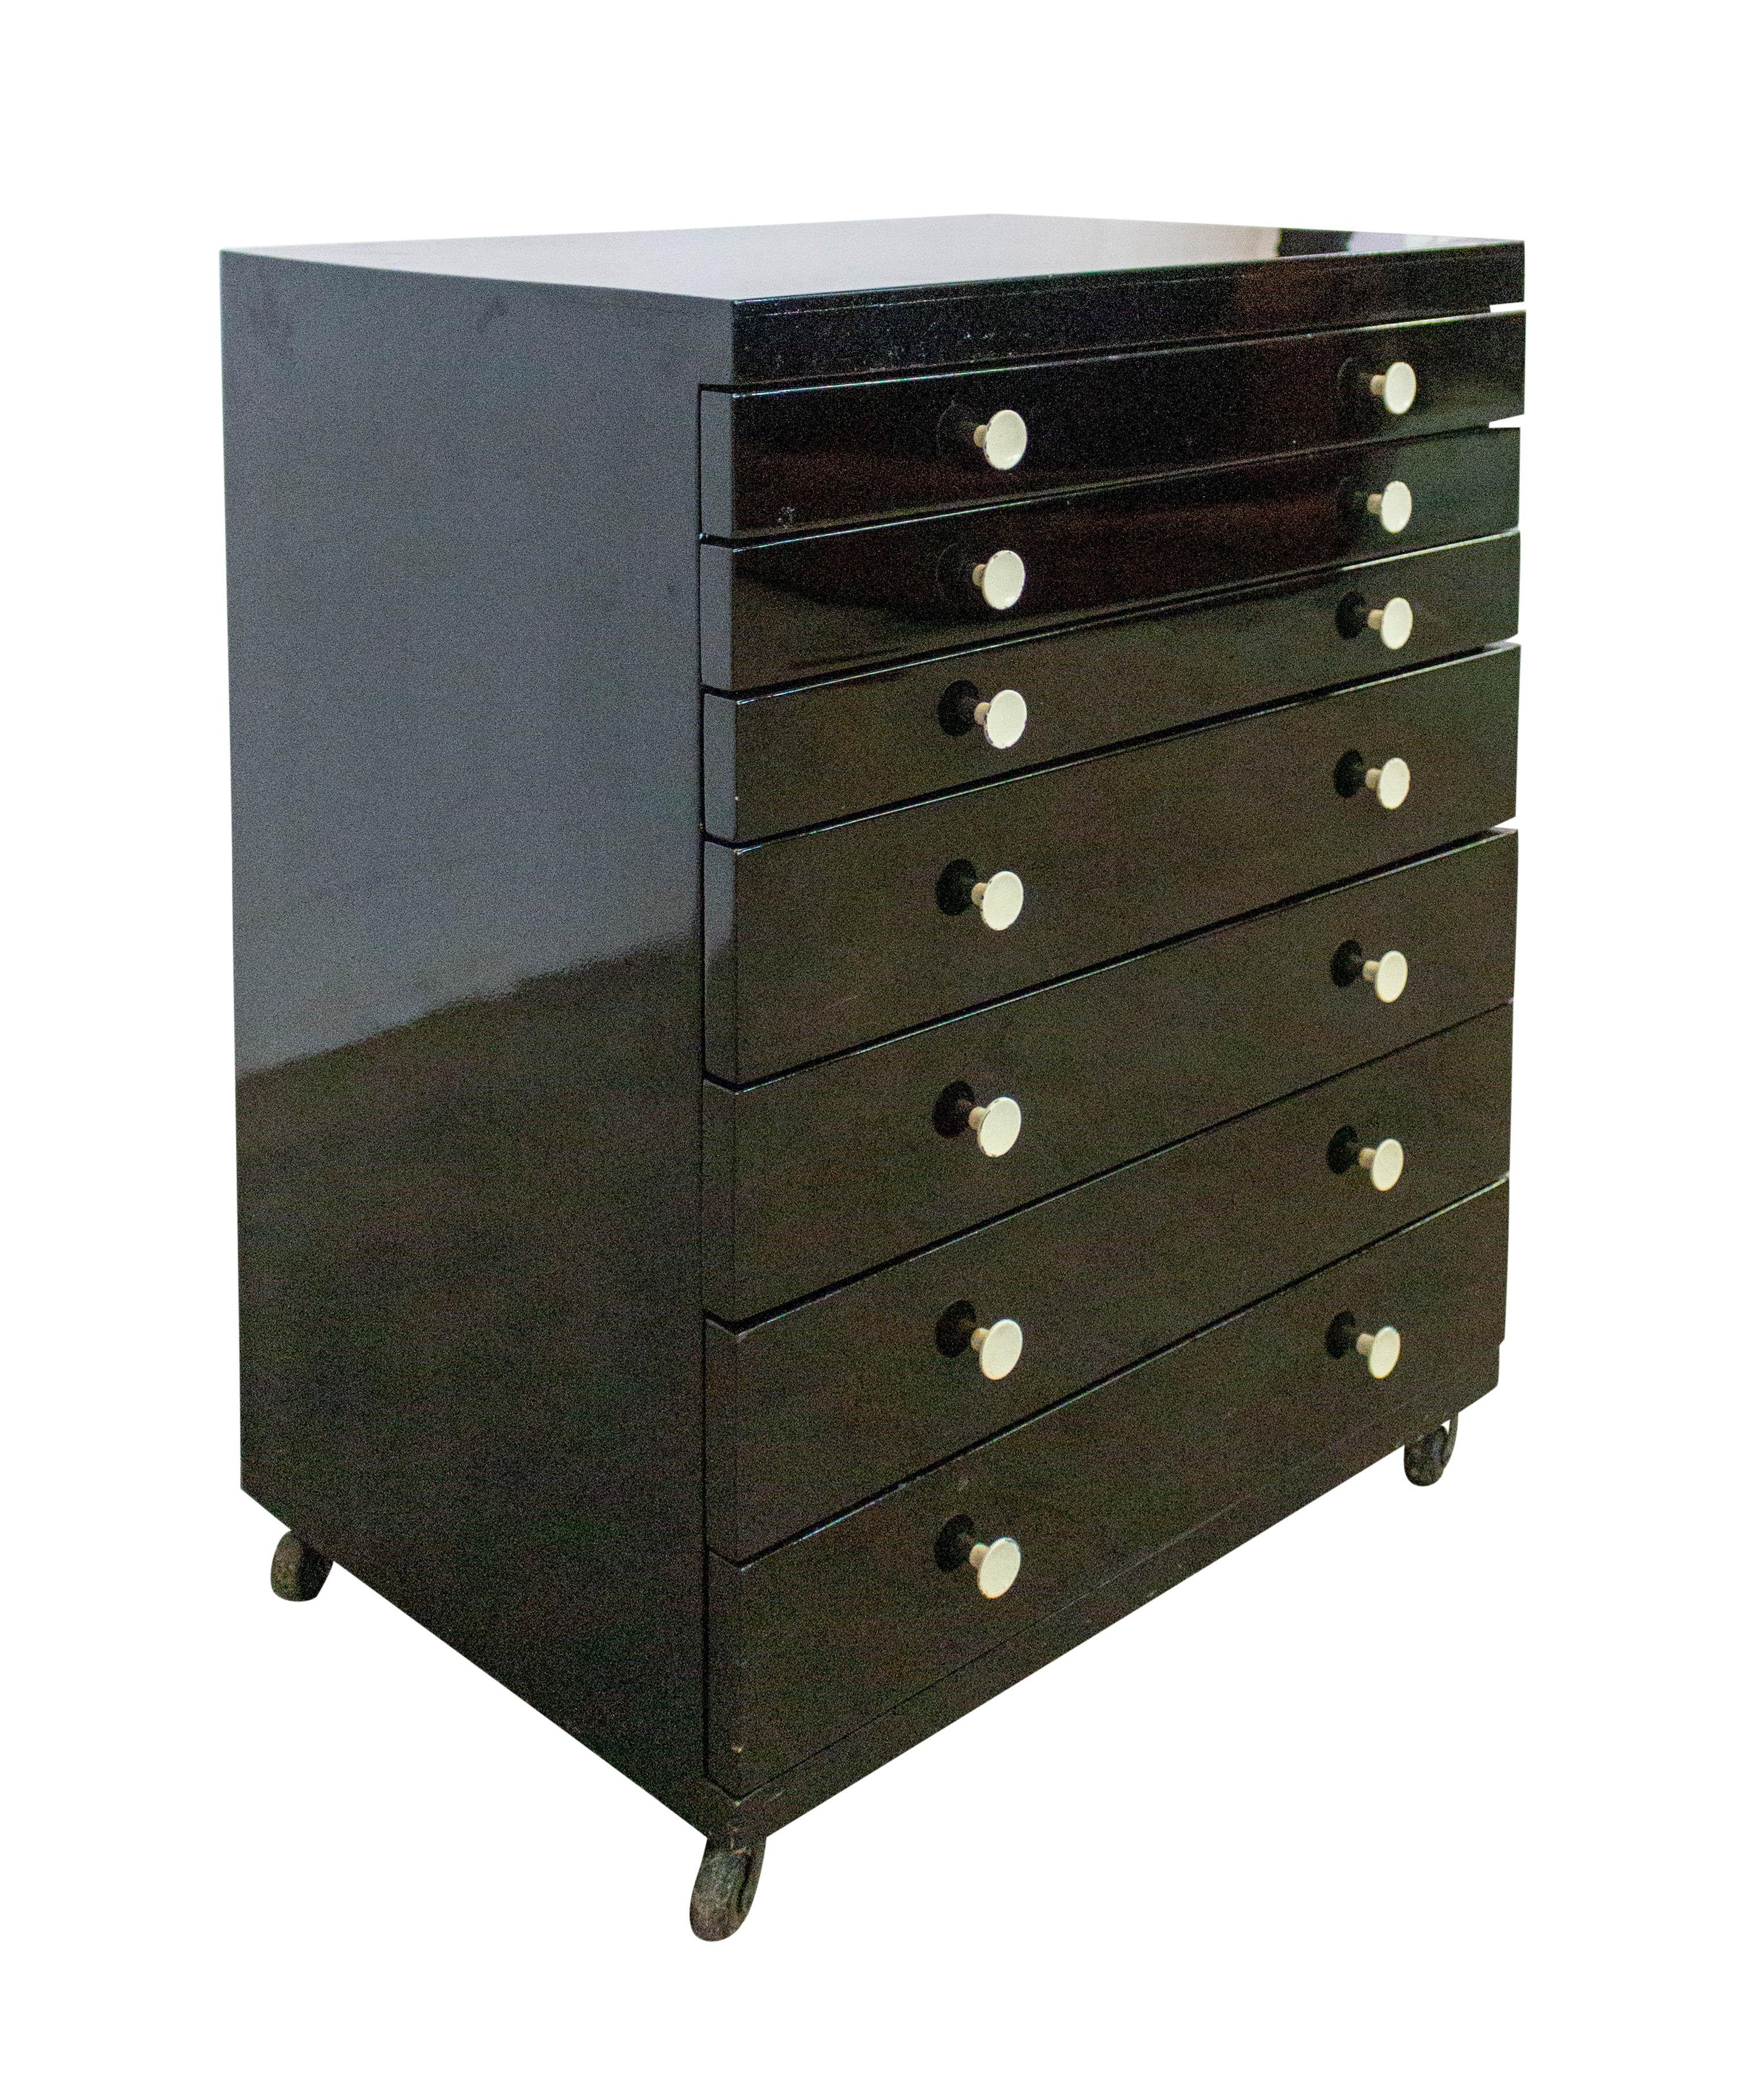 Midcentury bank of drawers, French, circa 1950-1960.
Built for the medical field, specifically dentists.
Meubles de Metier 
Ideal for collectors, artists, kitchen, apothecary, office equipment storage
A handsome and practical piece for any